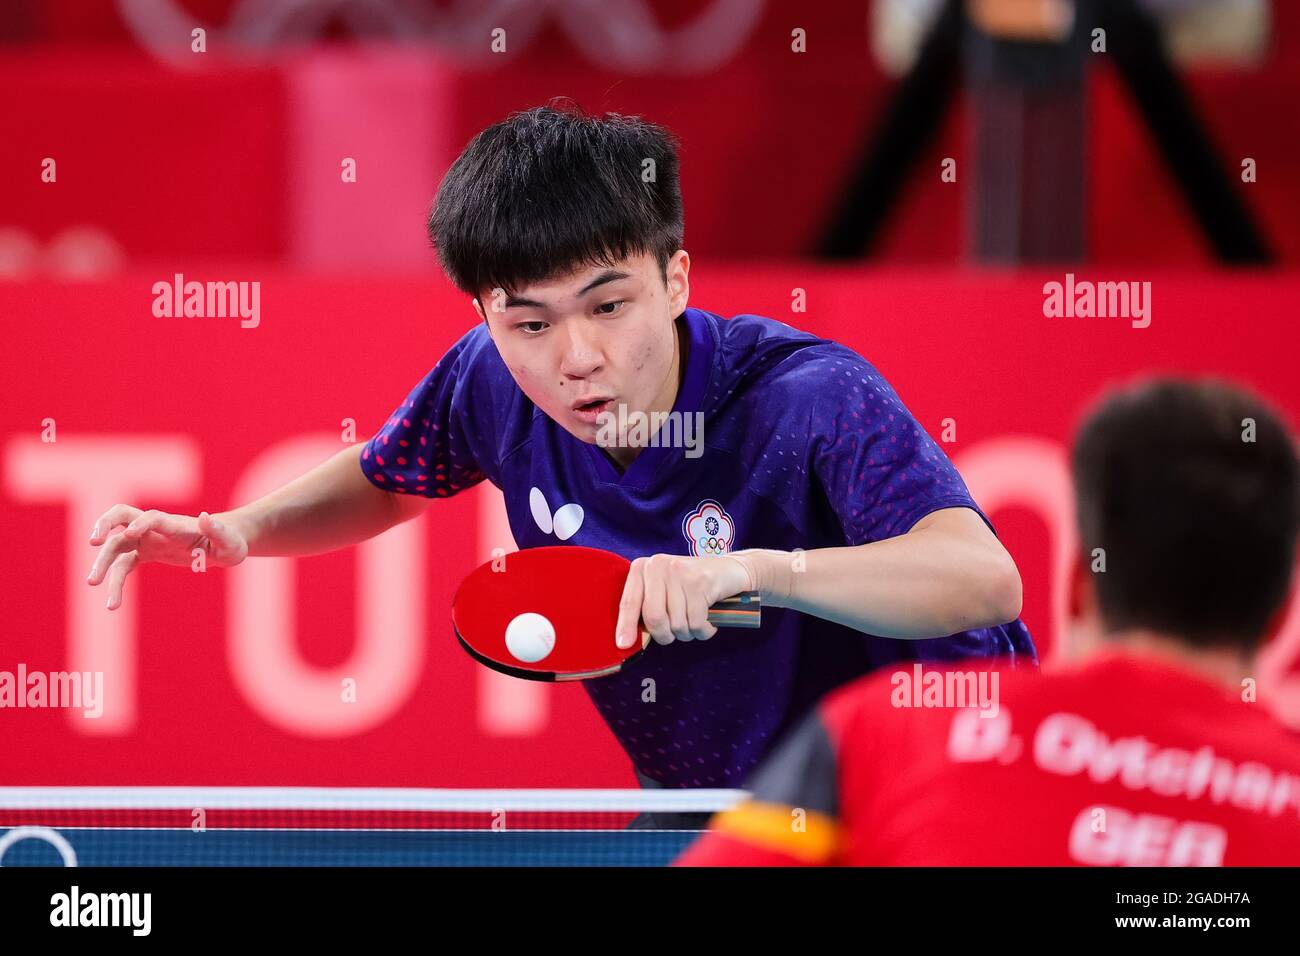 Tokyo, Japan. 30th July, 2021. Lin Yun Ju plays a shot during the Men's Table  Tennis Singles Bronze Medal Match between Lin Yun Ju of Chinese Taipei and  Dimitrij Ovtcharov of Germany